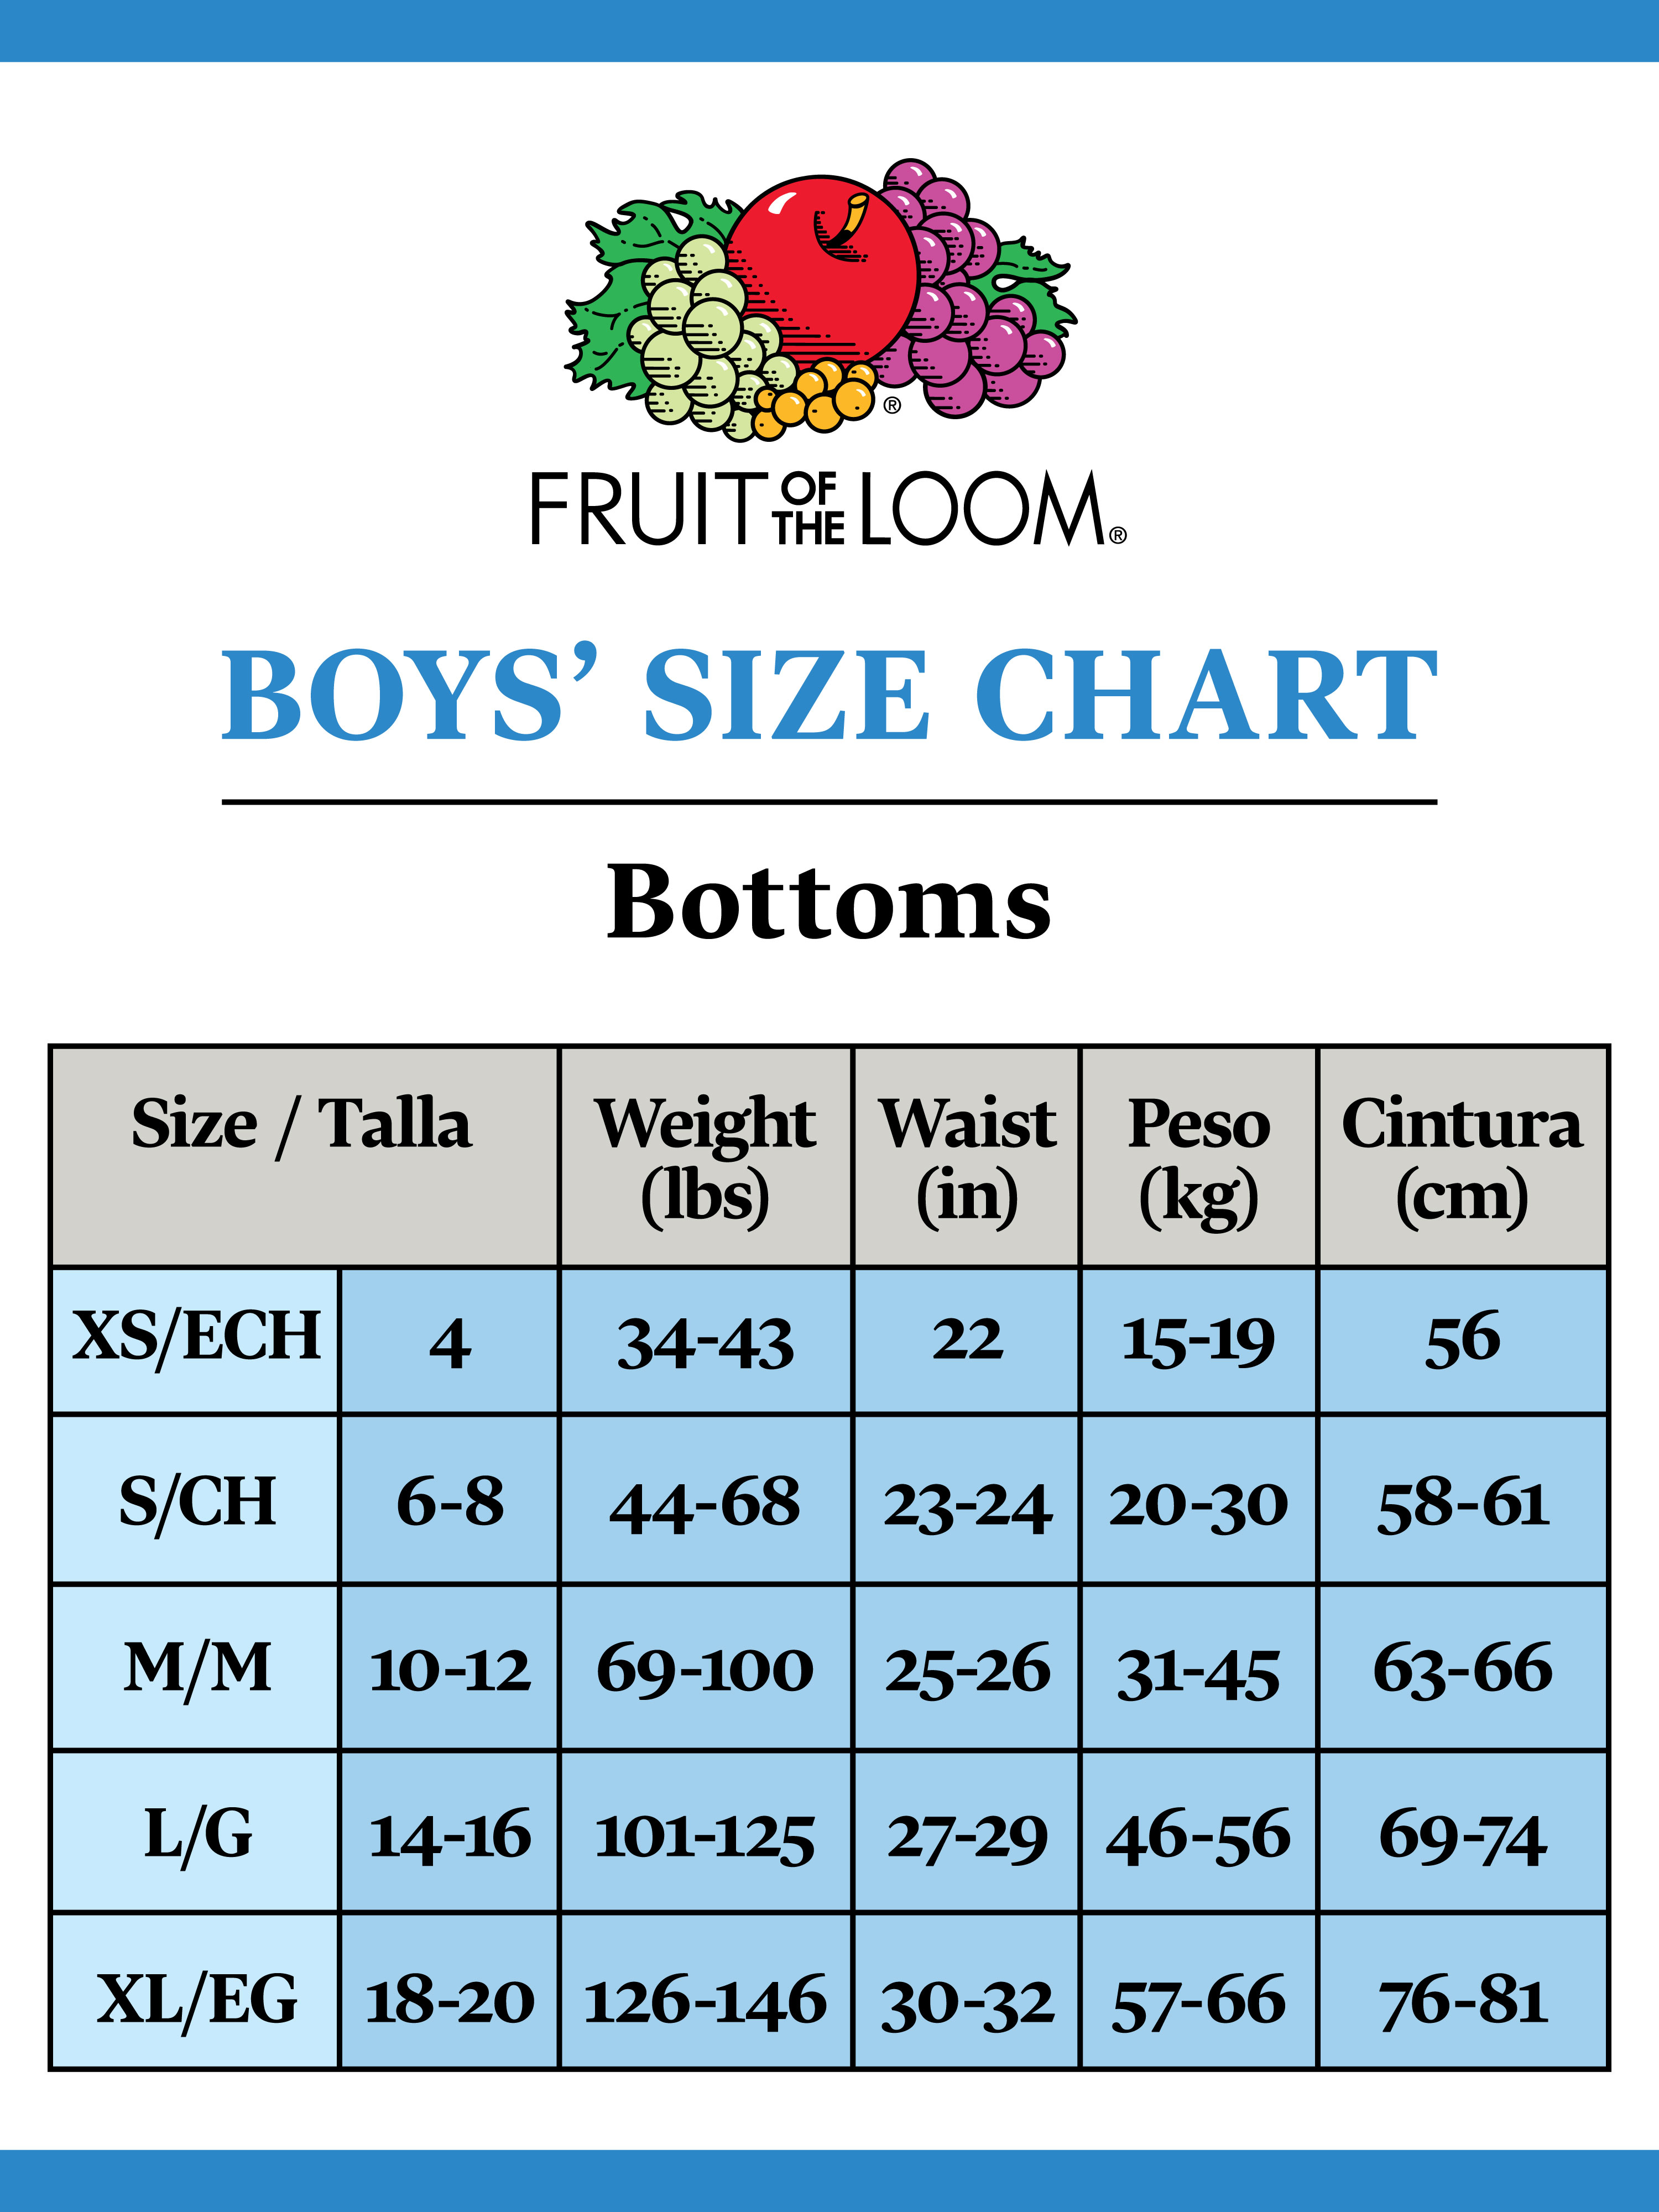 Fruit of the Loom Boys' Seamless Comfort Boxer Briefs, 4 Pack - image 5 of 5